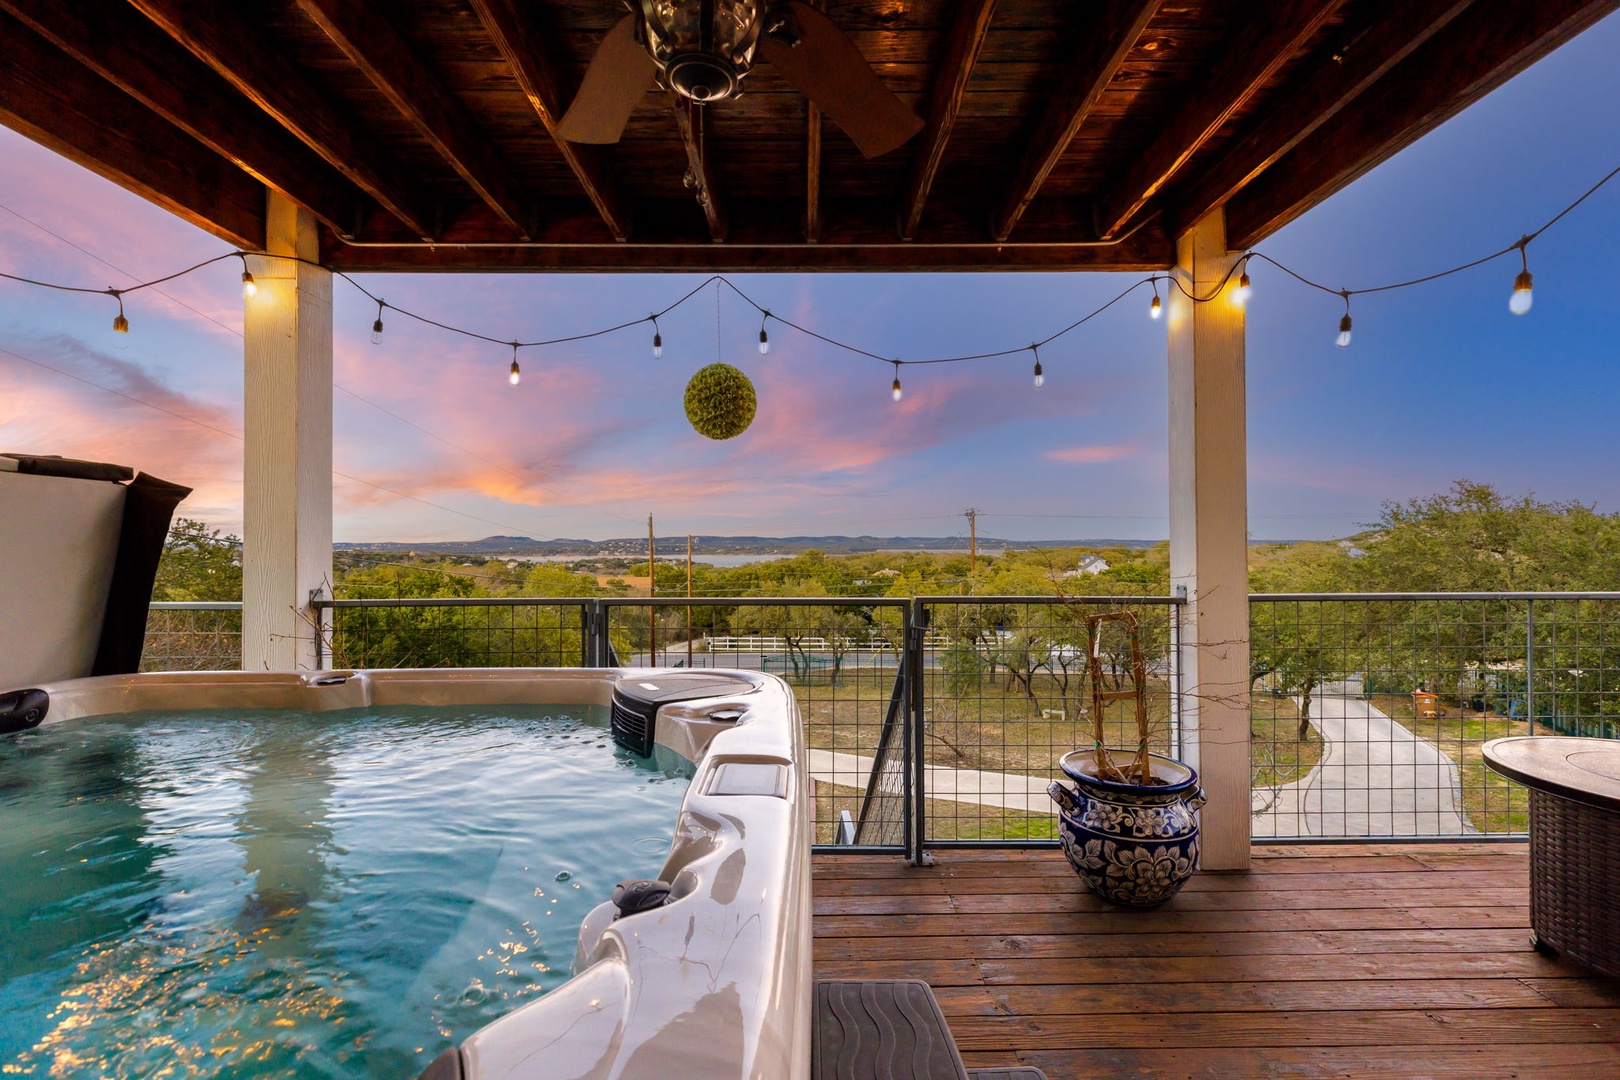 Soak your cares away with stunning views in the chalet’s upper deck hot tub